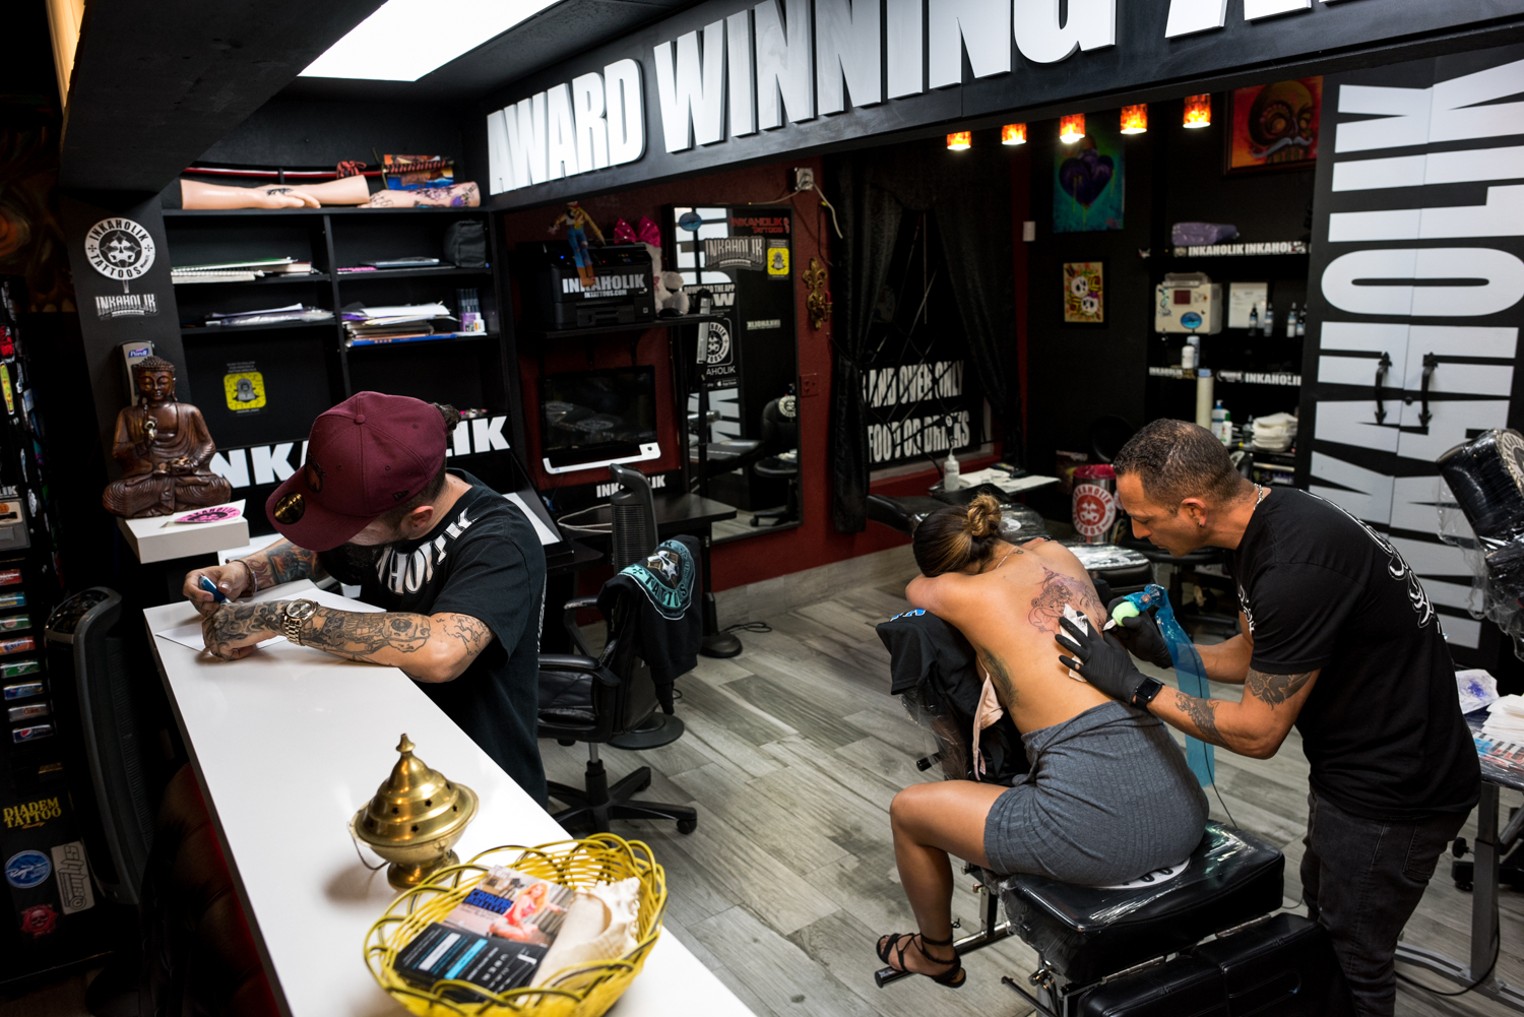 Best Tattoo Shop 2018, Inkaholik, Best Restaurants, Bars, Clubs, Music  and Stores in Miami